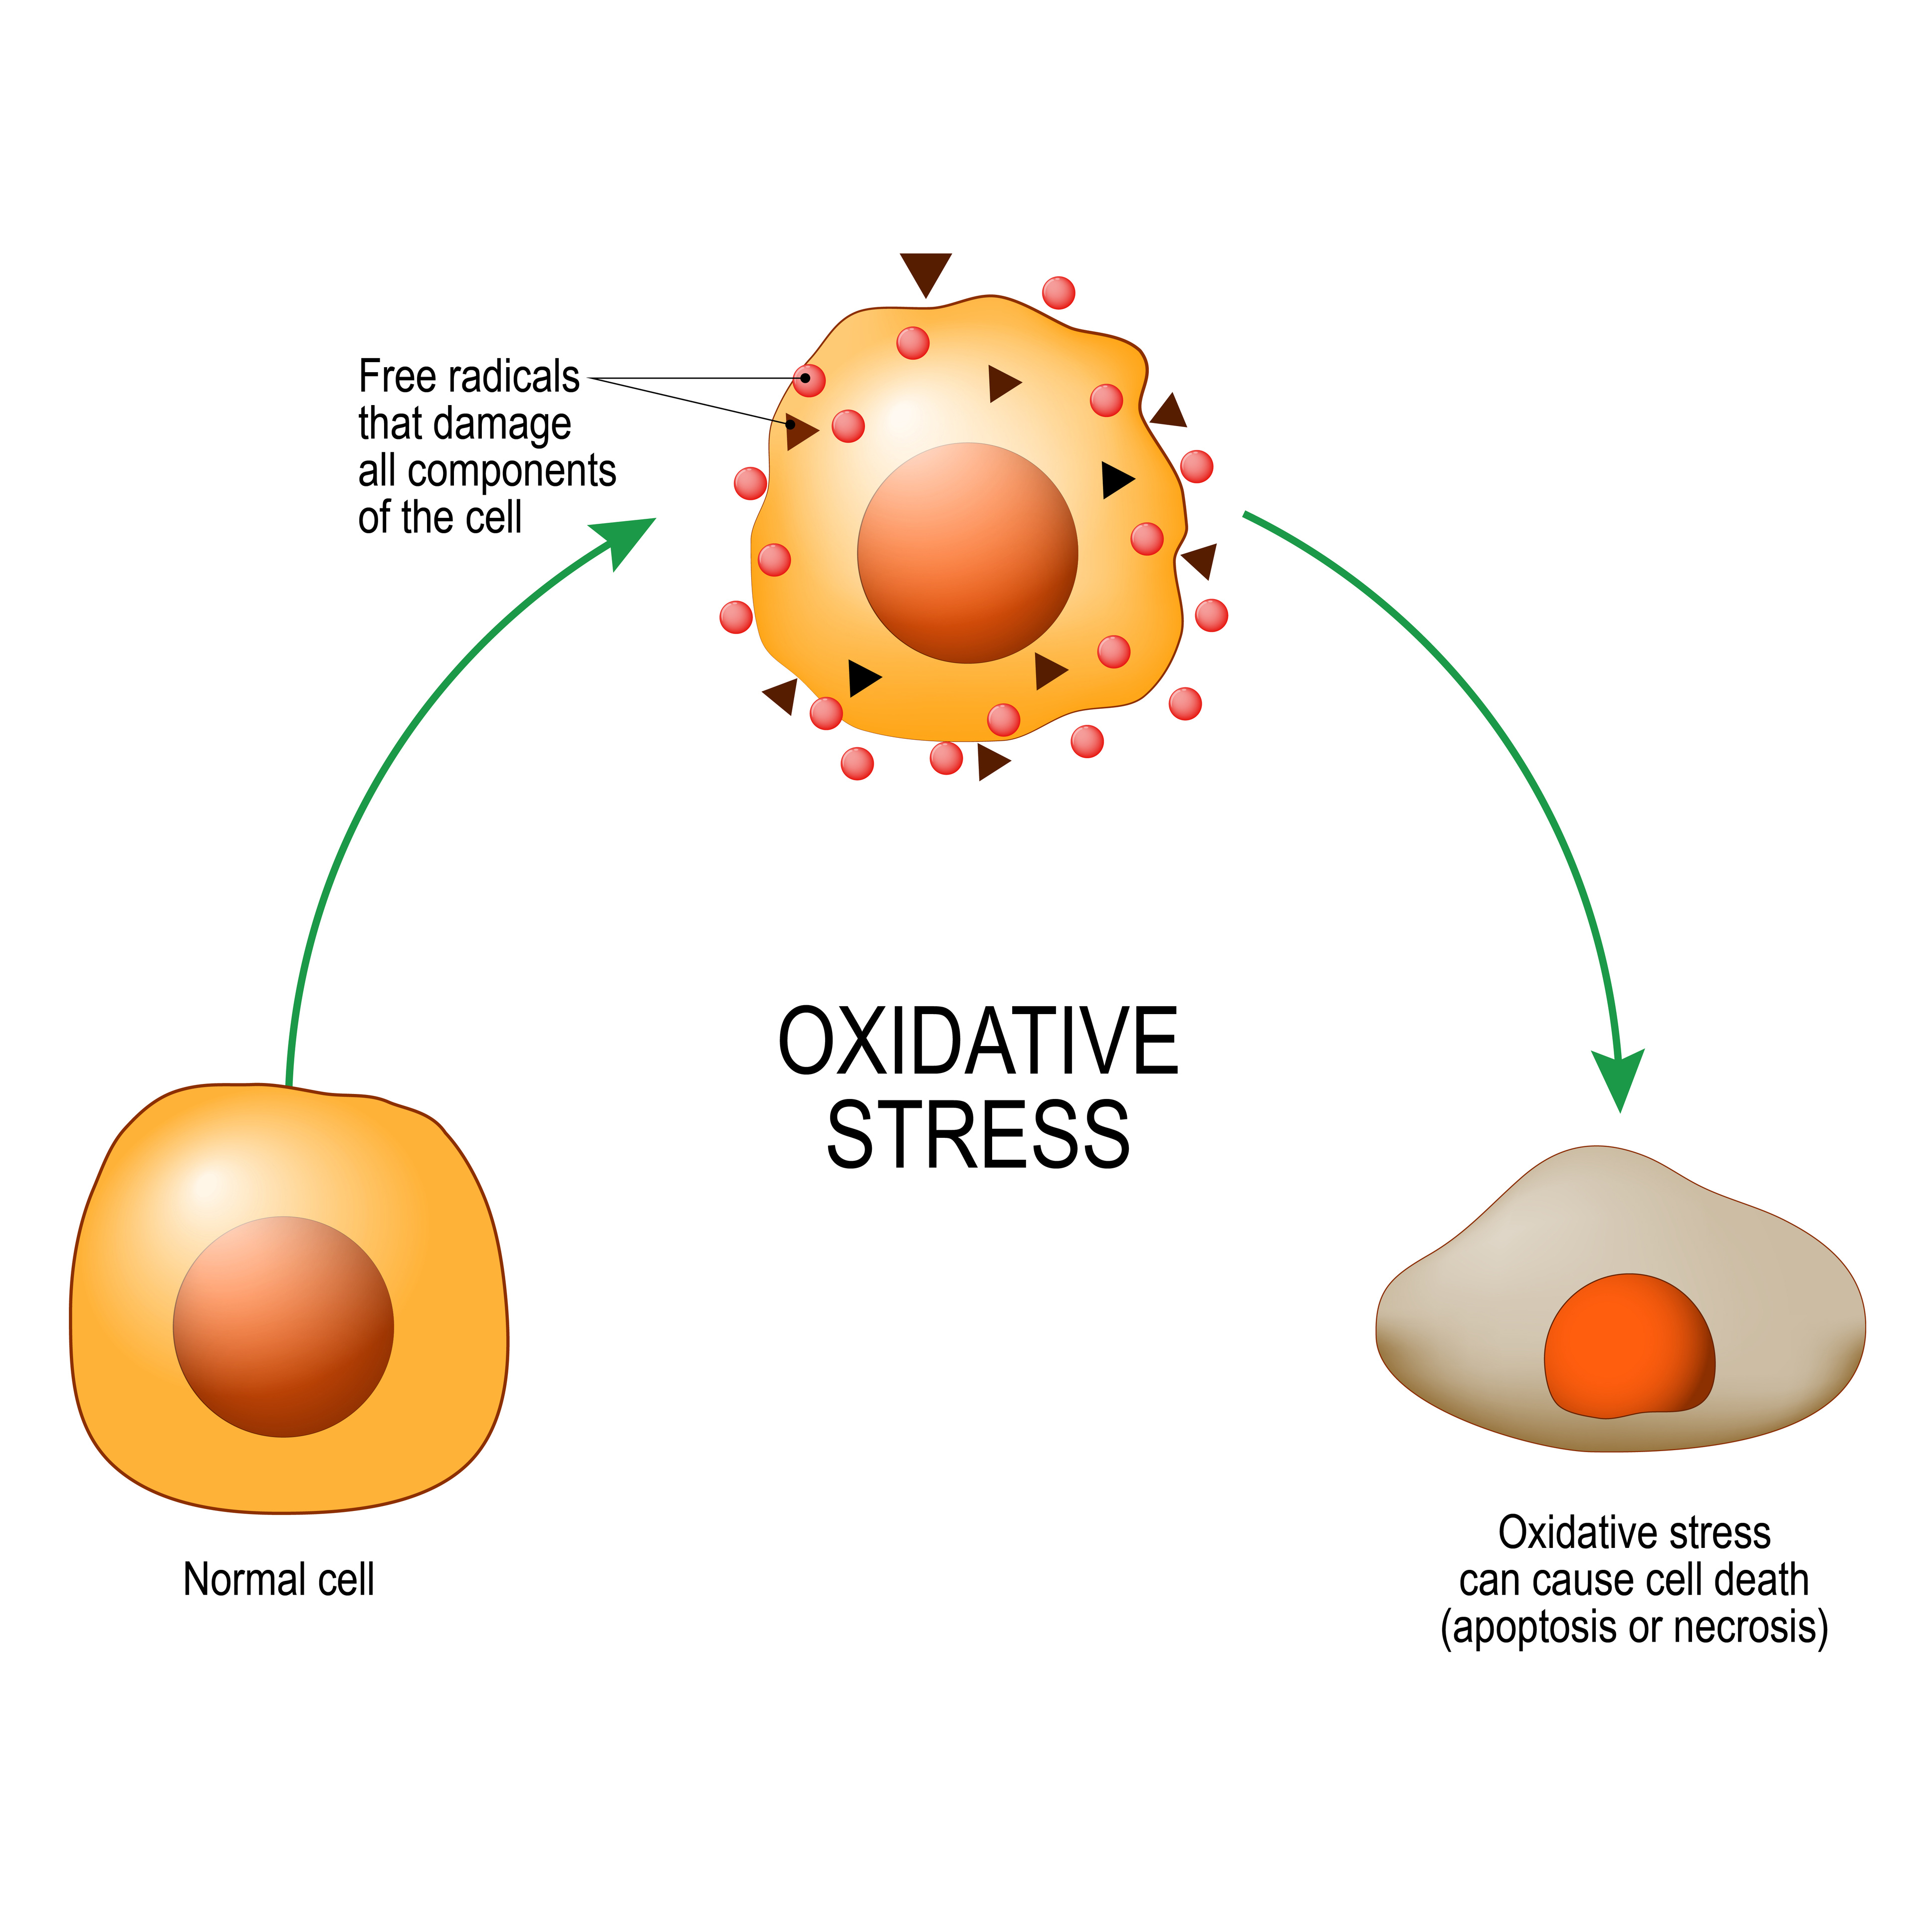 Oxidative stress. From Normal cell, to Oxidative stress and aggressive free radicals, cell death. 